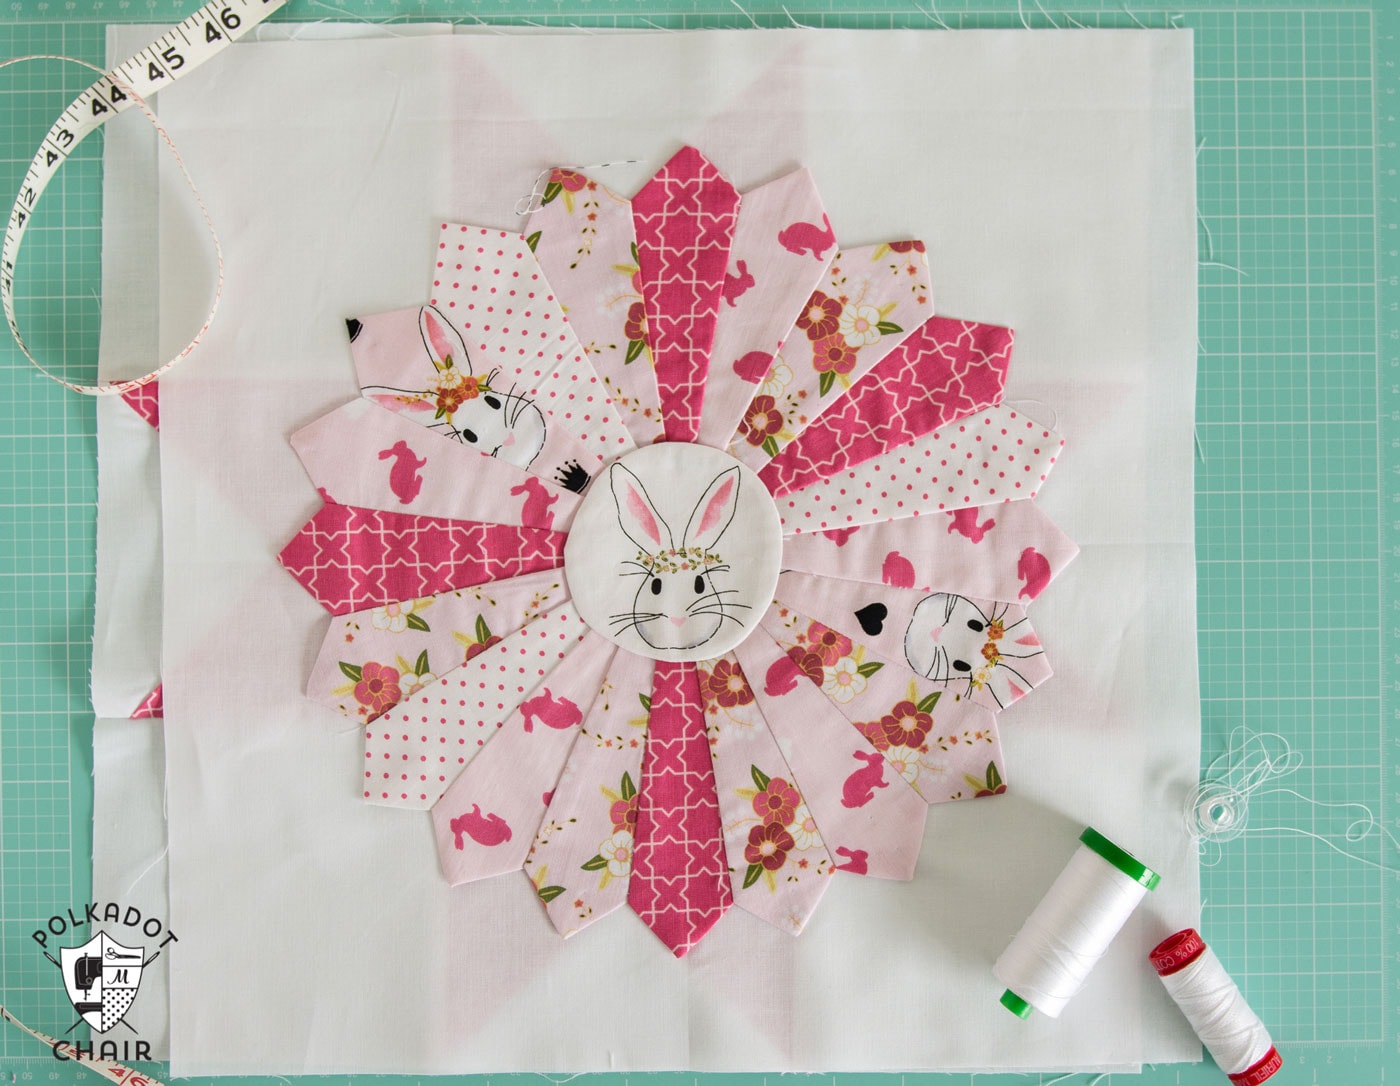 Free Tutorial for a Dresden Quilt Block; the August Block of the month featured on polkadotchair.com